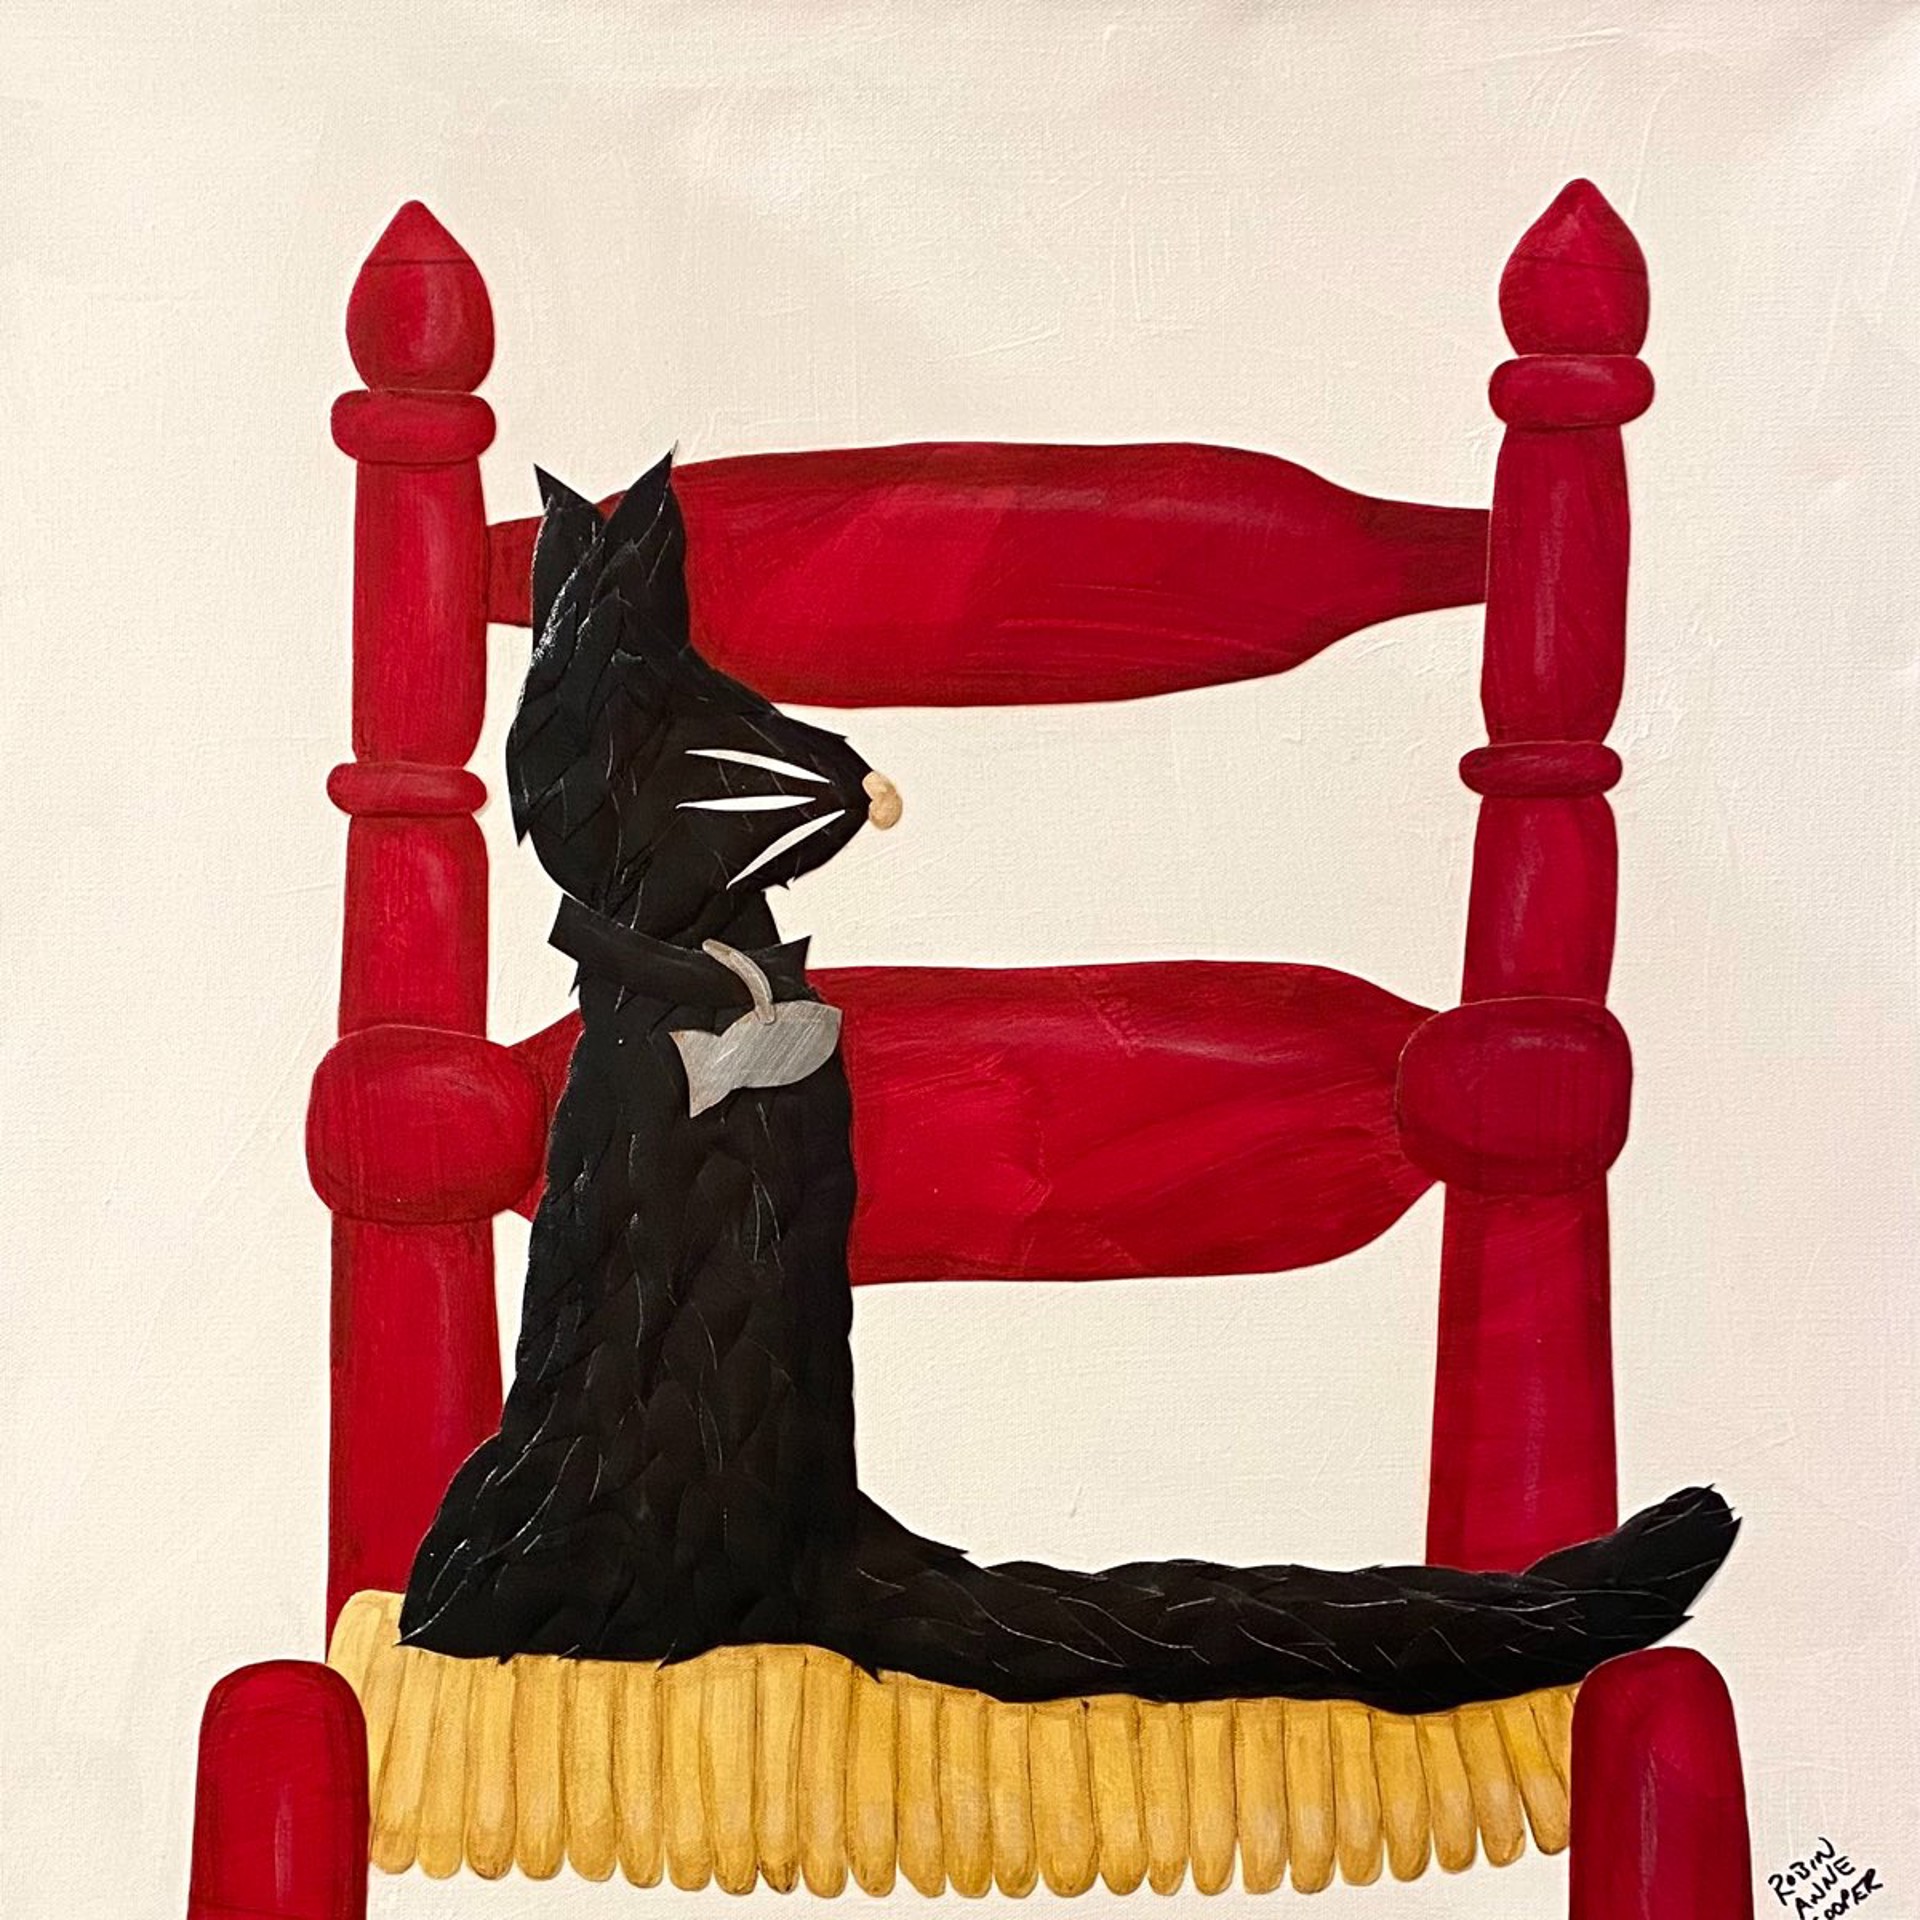 Black Cat On Red Slat-Back Chair by Robin Cooper